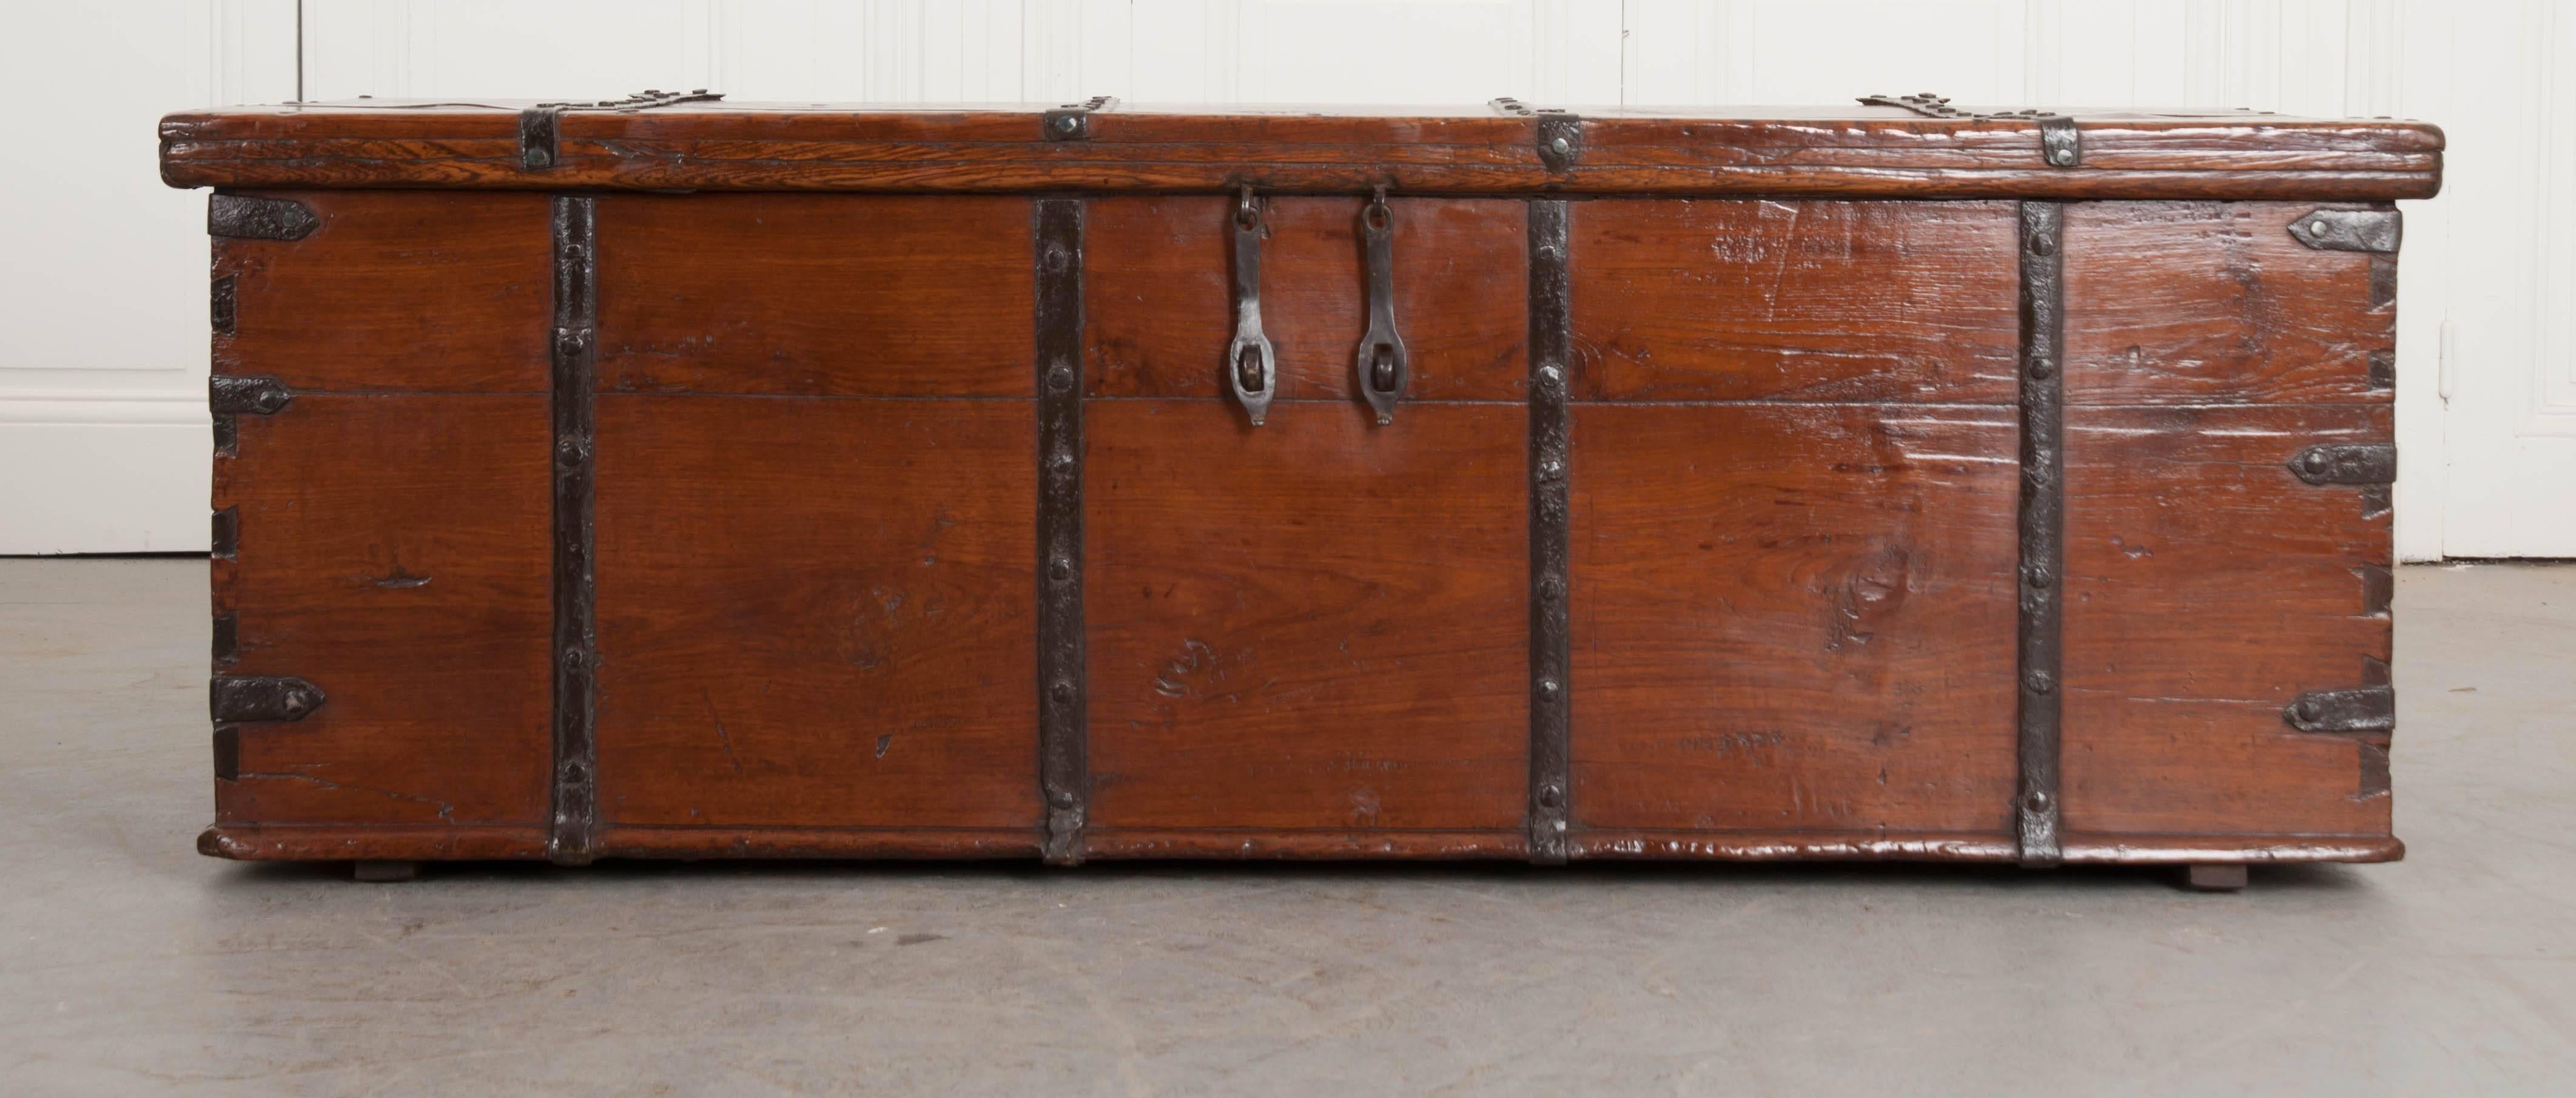 A fabulous solid-teak 19th century Anglo-Indian iron strapped trunk circa 1860. The antique chest was constructed using teak with iron banding wrapping the entire piece. Teak is resilient in hot and humid climates, and was the preferred wood used